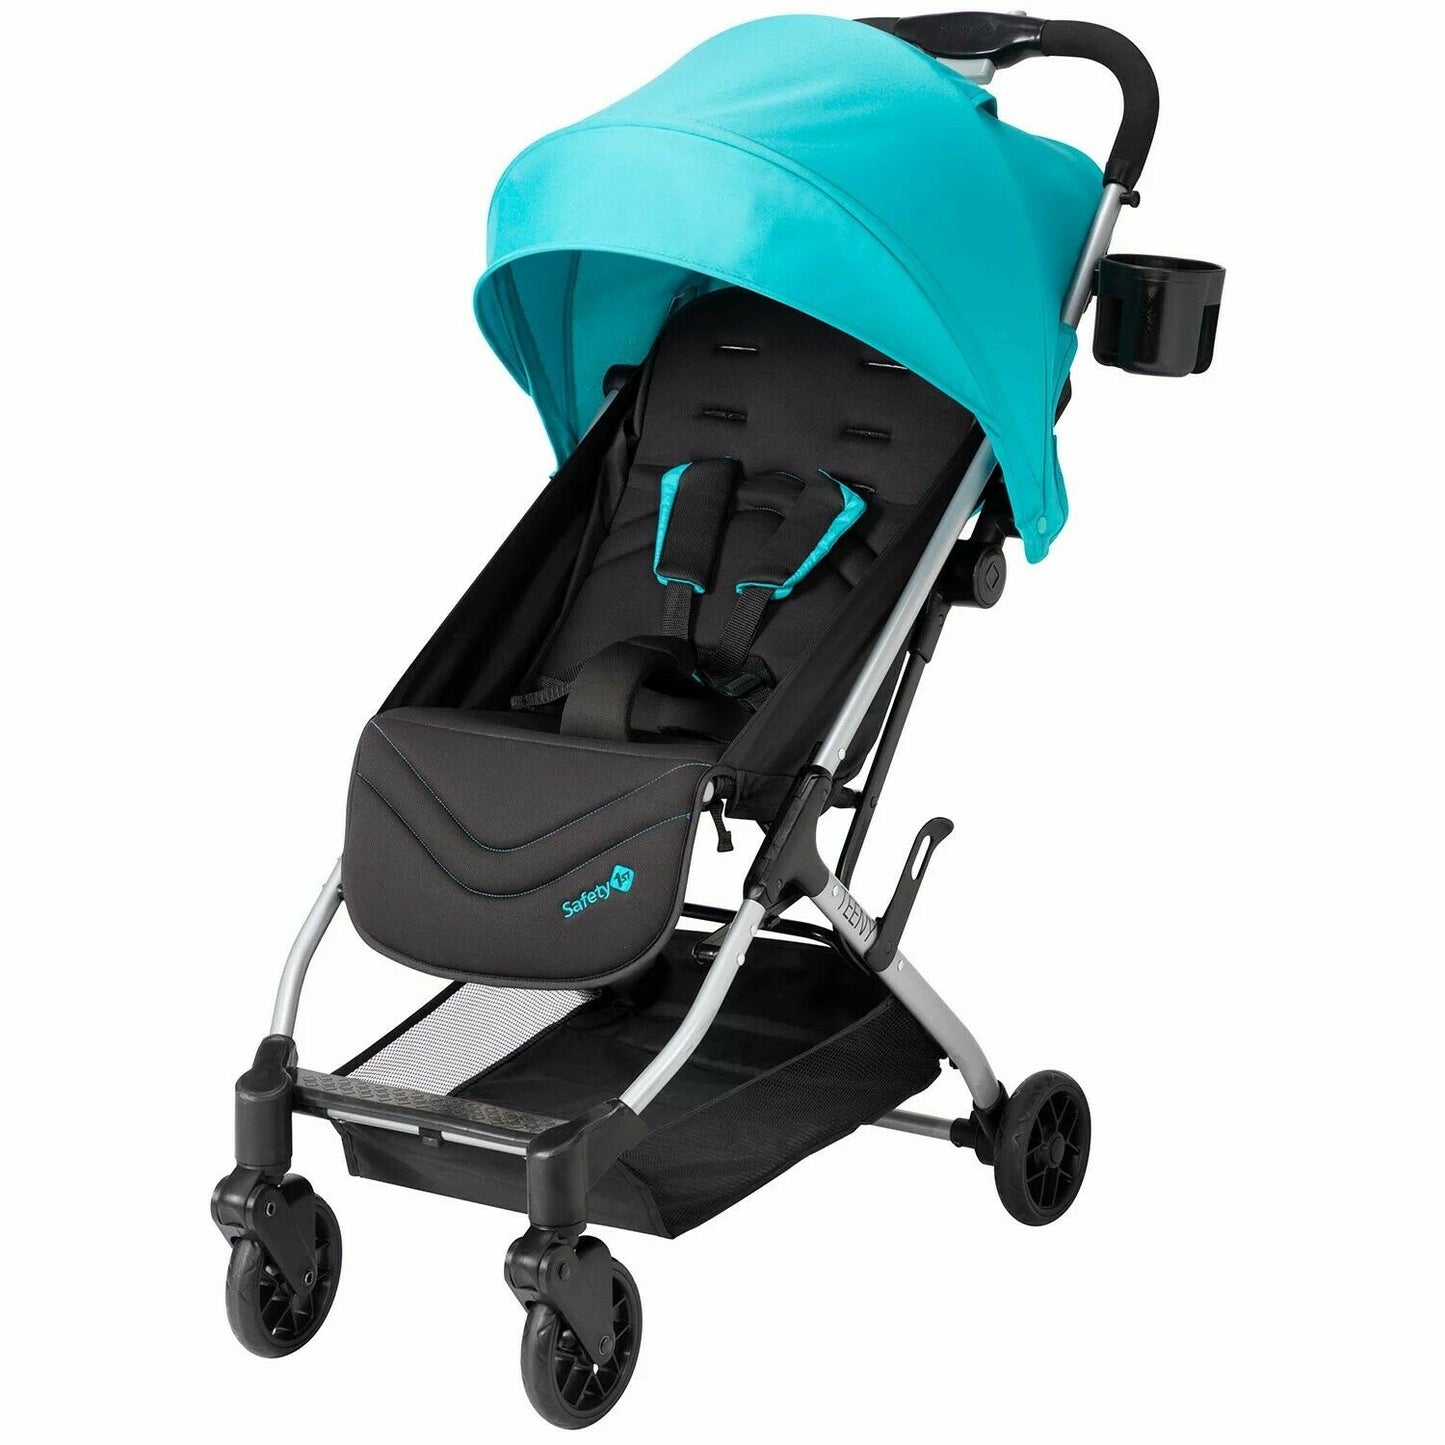 Safety 1st Ultra Compact Baby Stroller Lightweight One Hand Fold Travel - Blue